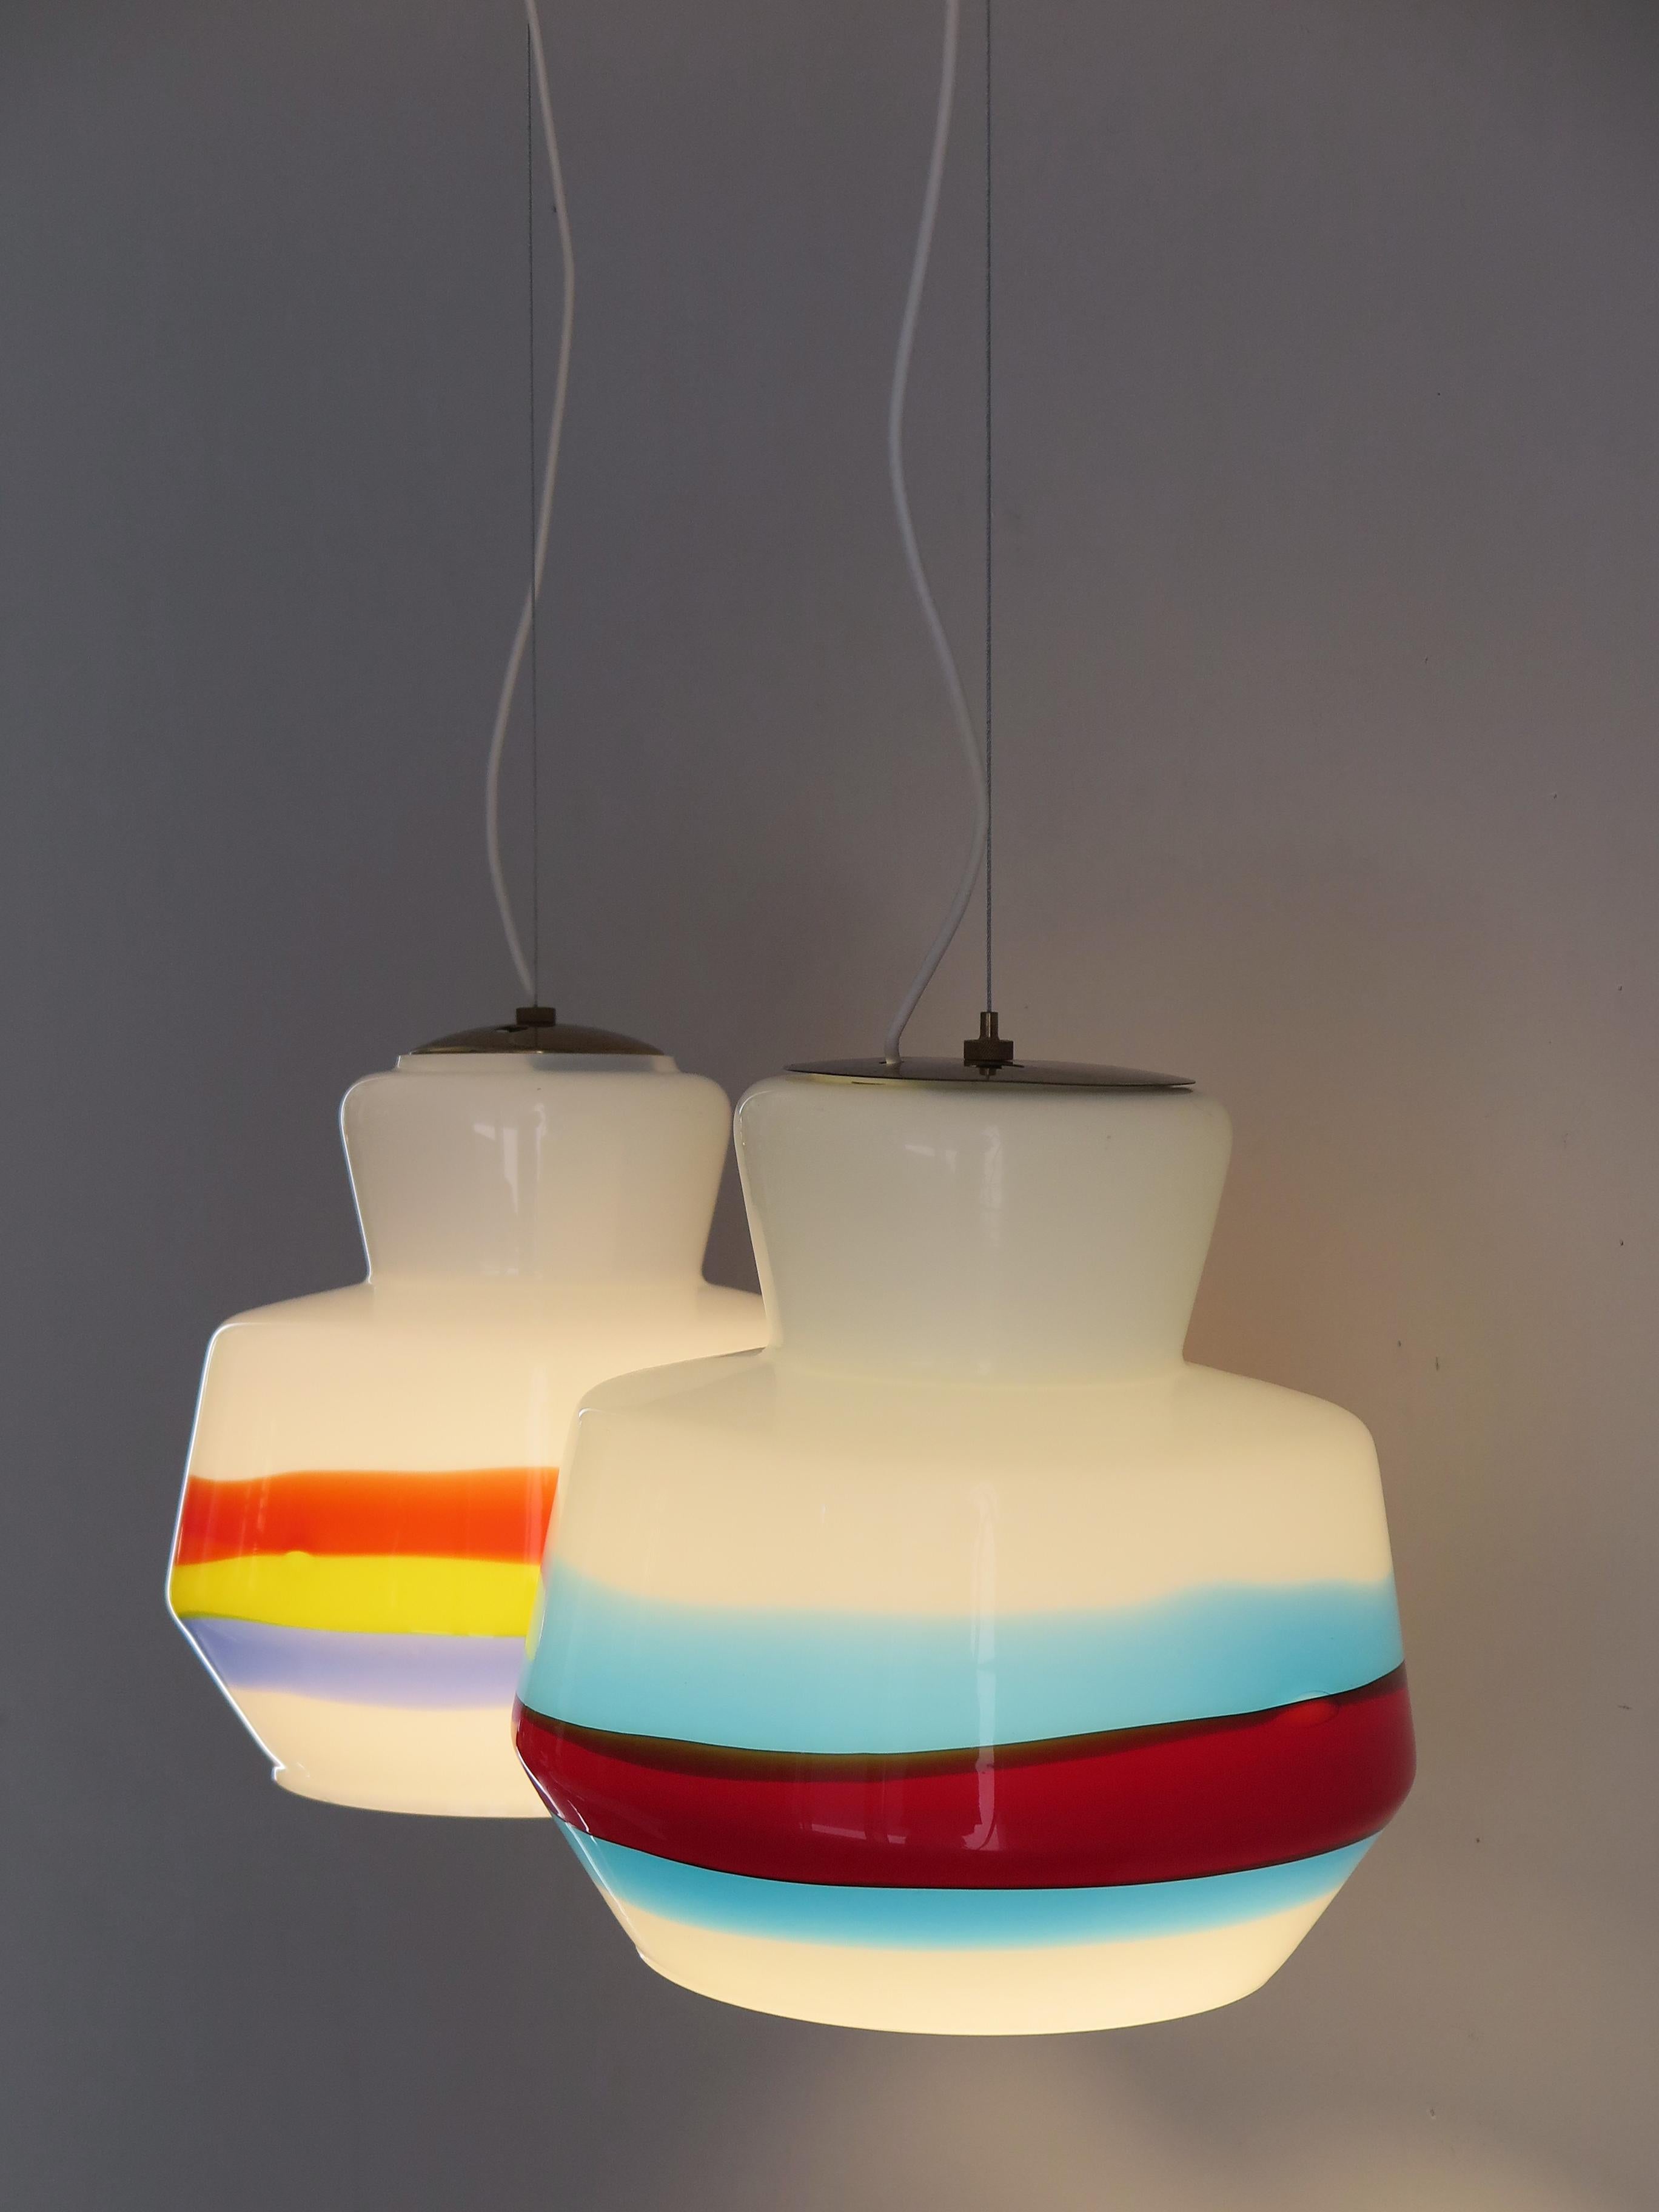 Couple of Mid-Century Modern design Italian glass pendant lamps produced by Stilnovo, glass diffusers and brass details, manufacturer's original adhesive labels, circa 1950s.

Please note that the lamp are original of the period and this shows